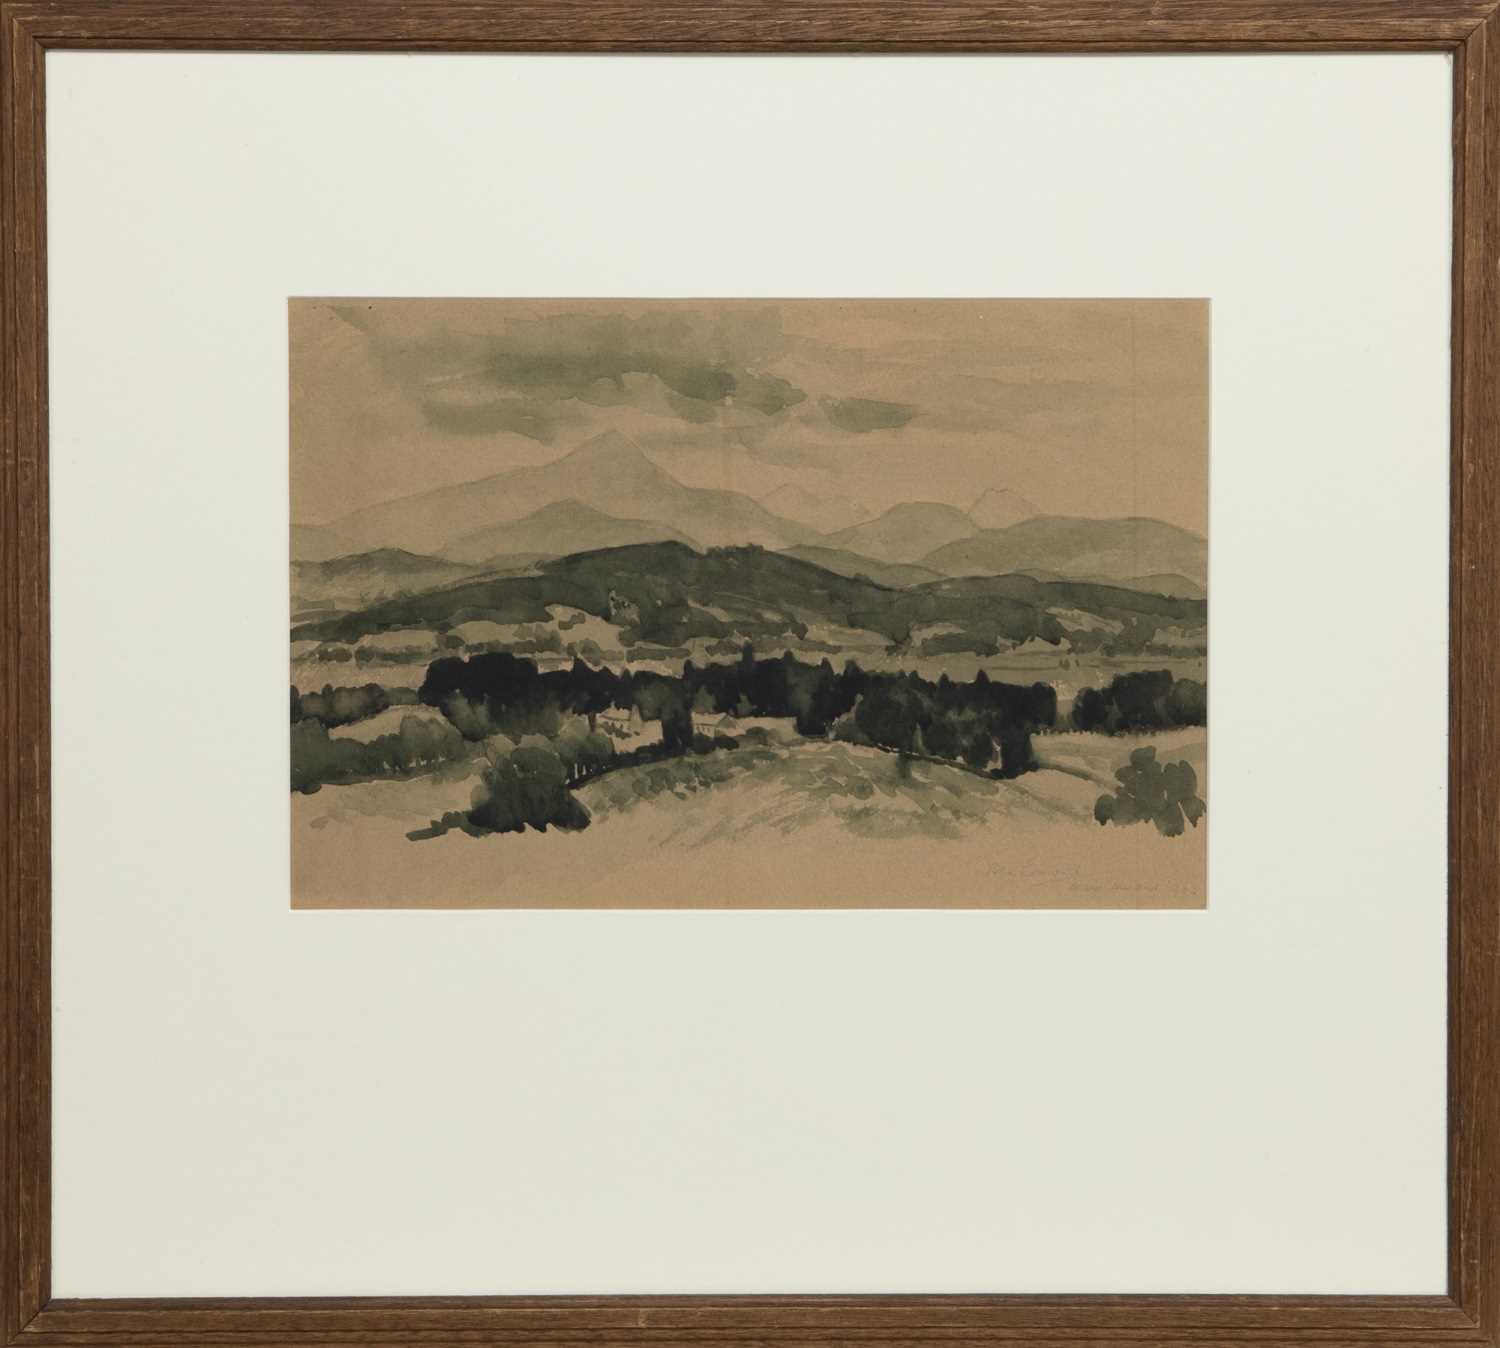 Lot 308 - BEN LOMOND FROM ARNPRIOR, A WATERCOLOUR BY MARY ARMOUR